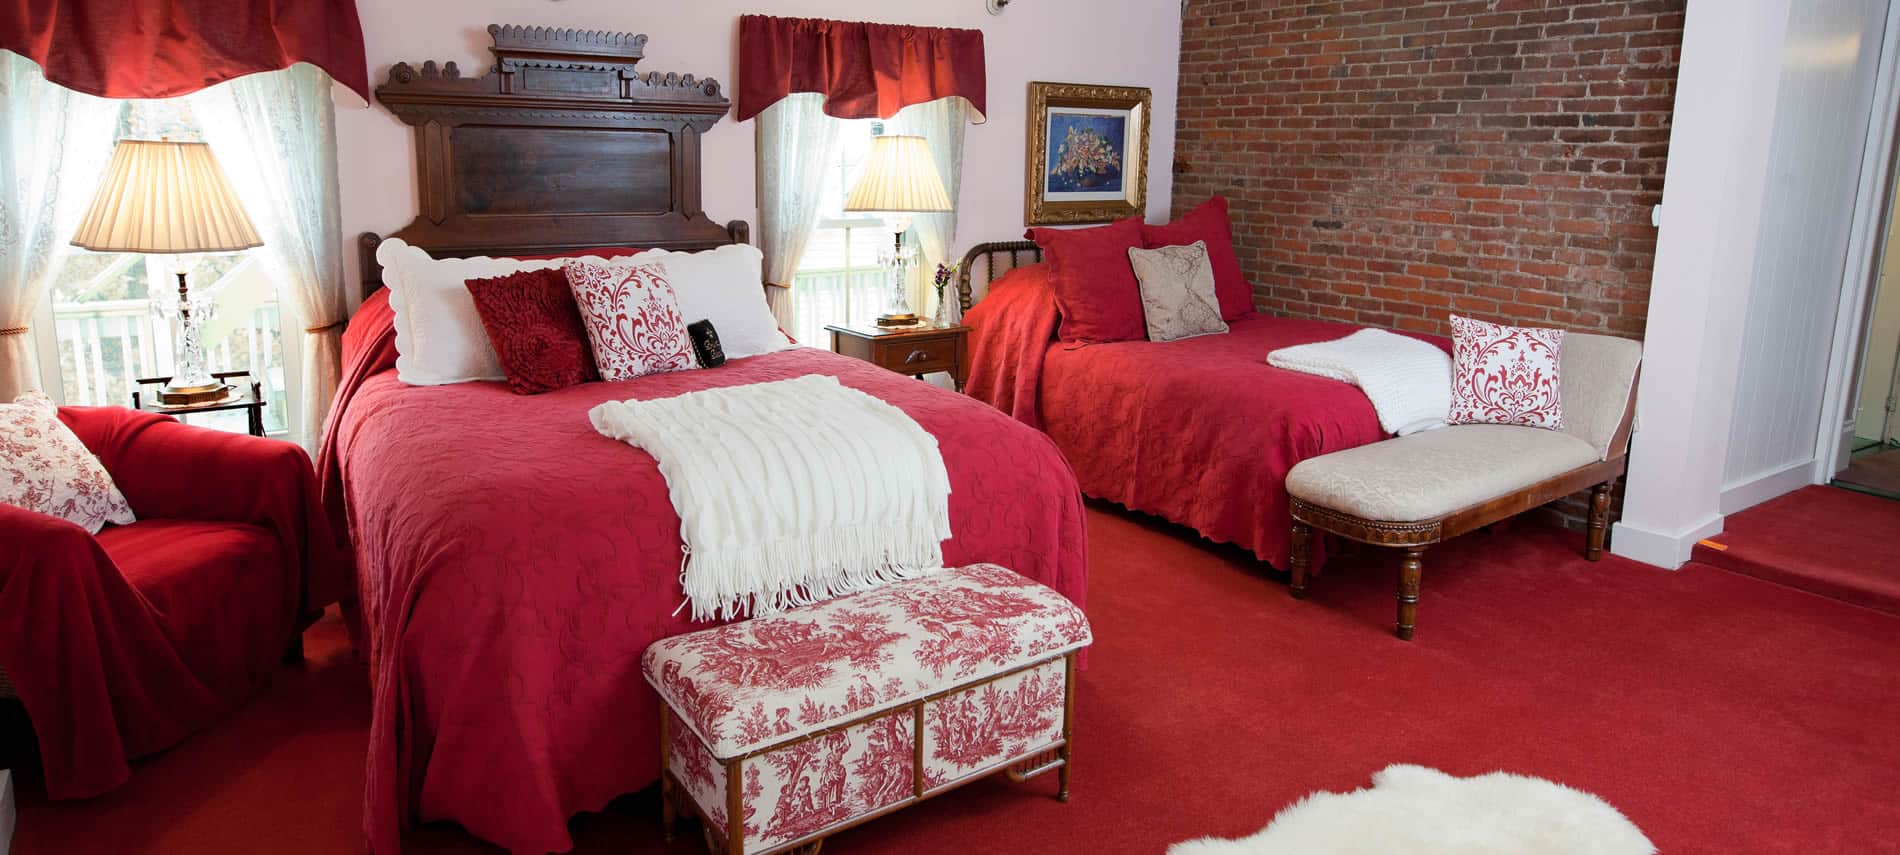 Prince Alfred guest room with red carpet, curtains and bedding, two beds and two windows